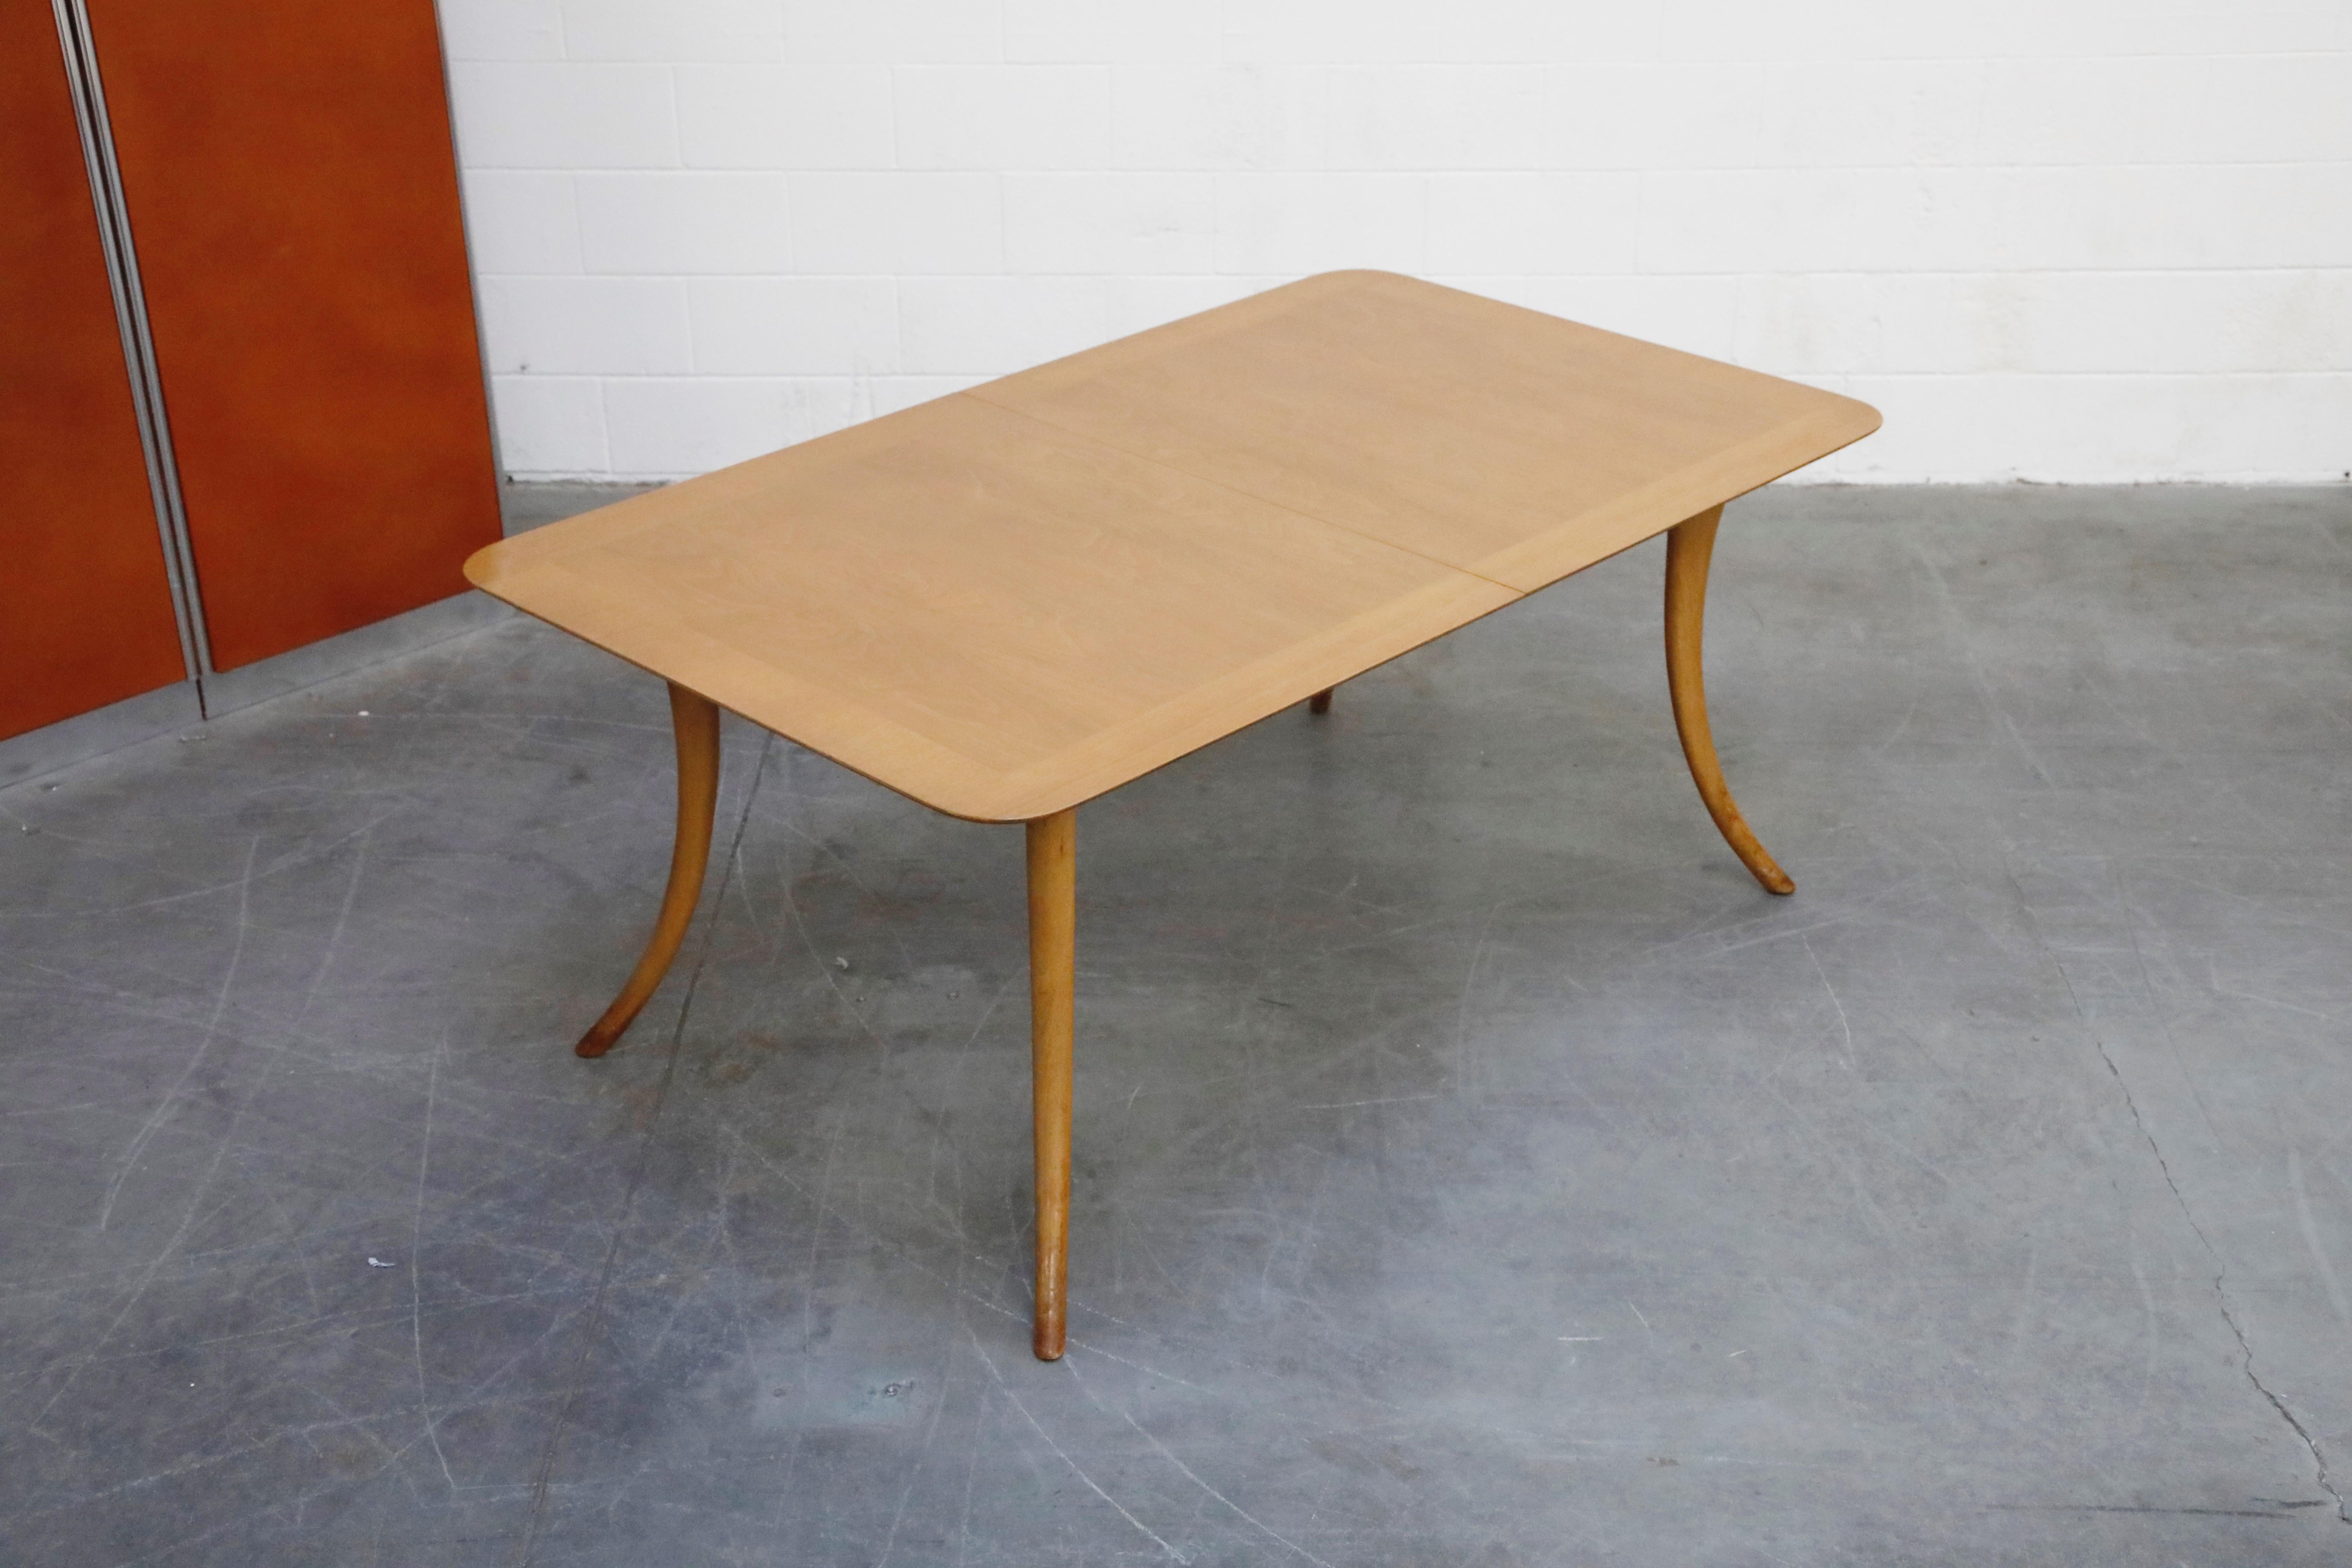 Mid-20th Century Expandable Dining Table by T.H. Robsjohn-Gibbings for Widdicomb, 1957, Signed